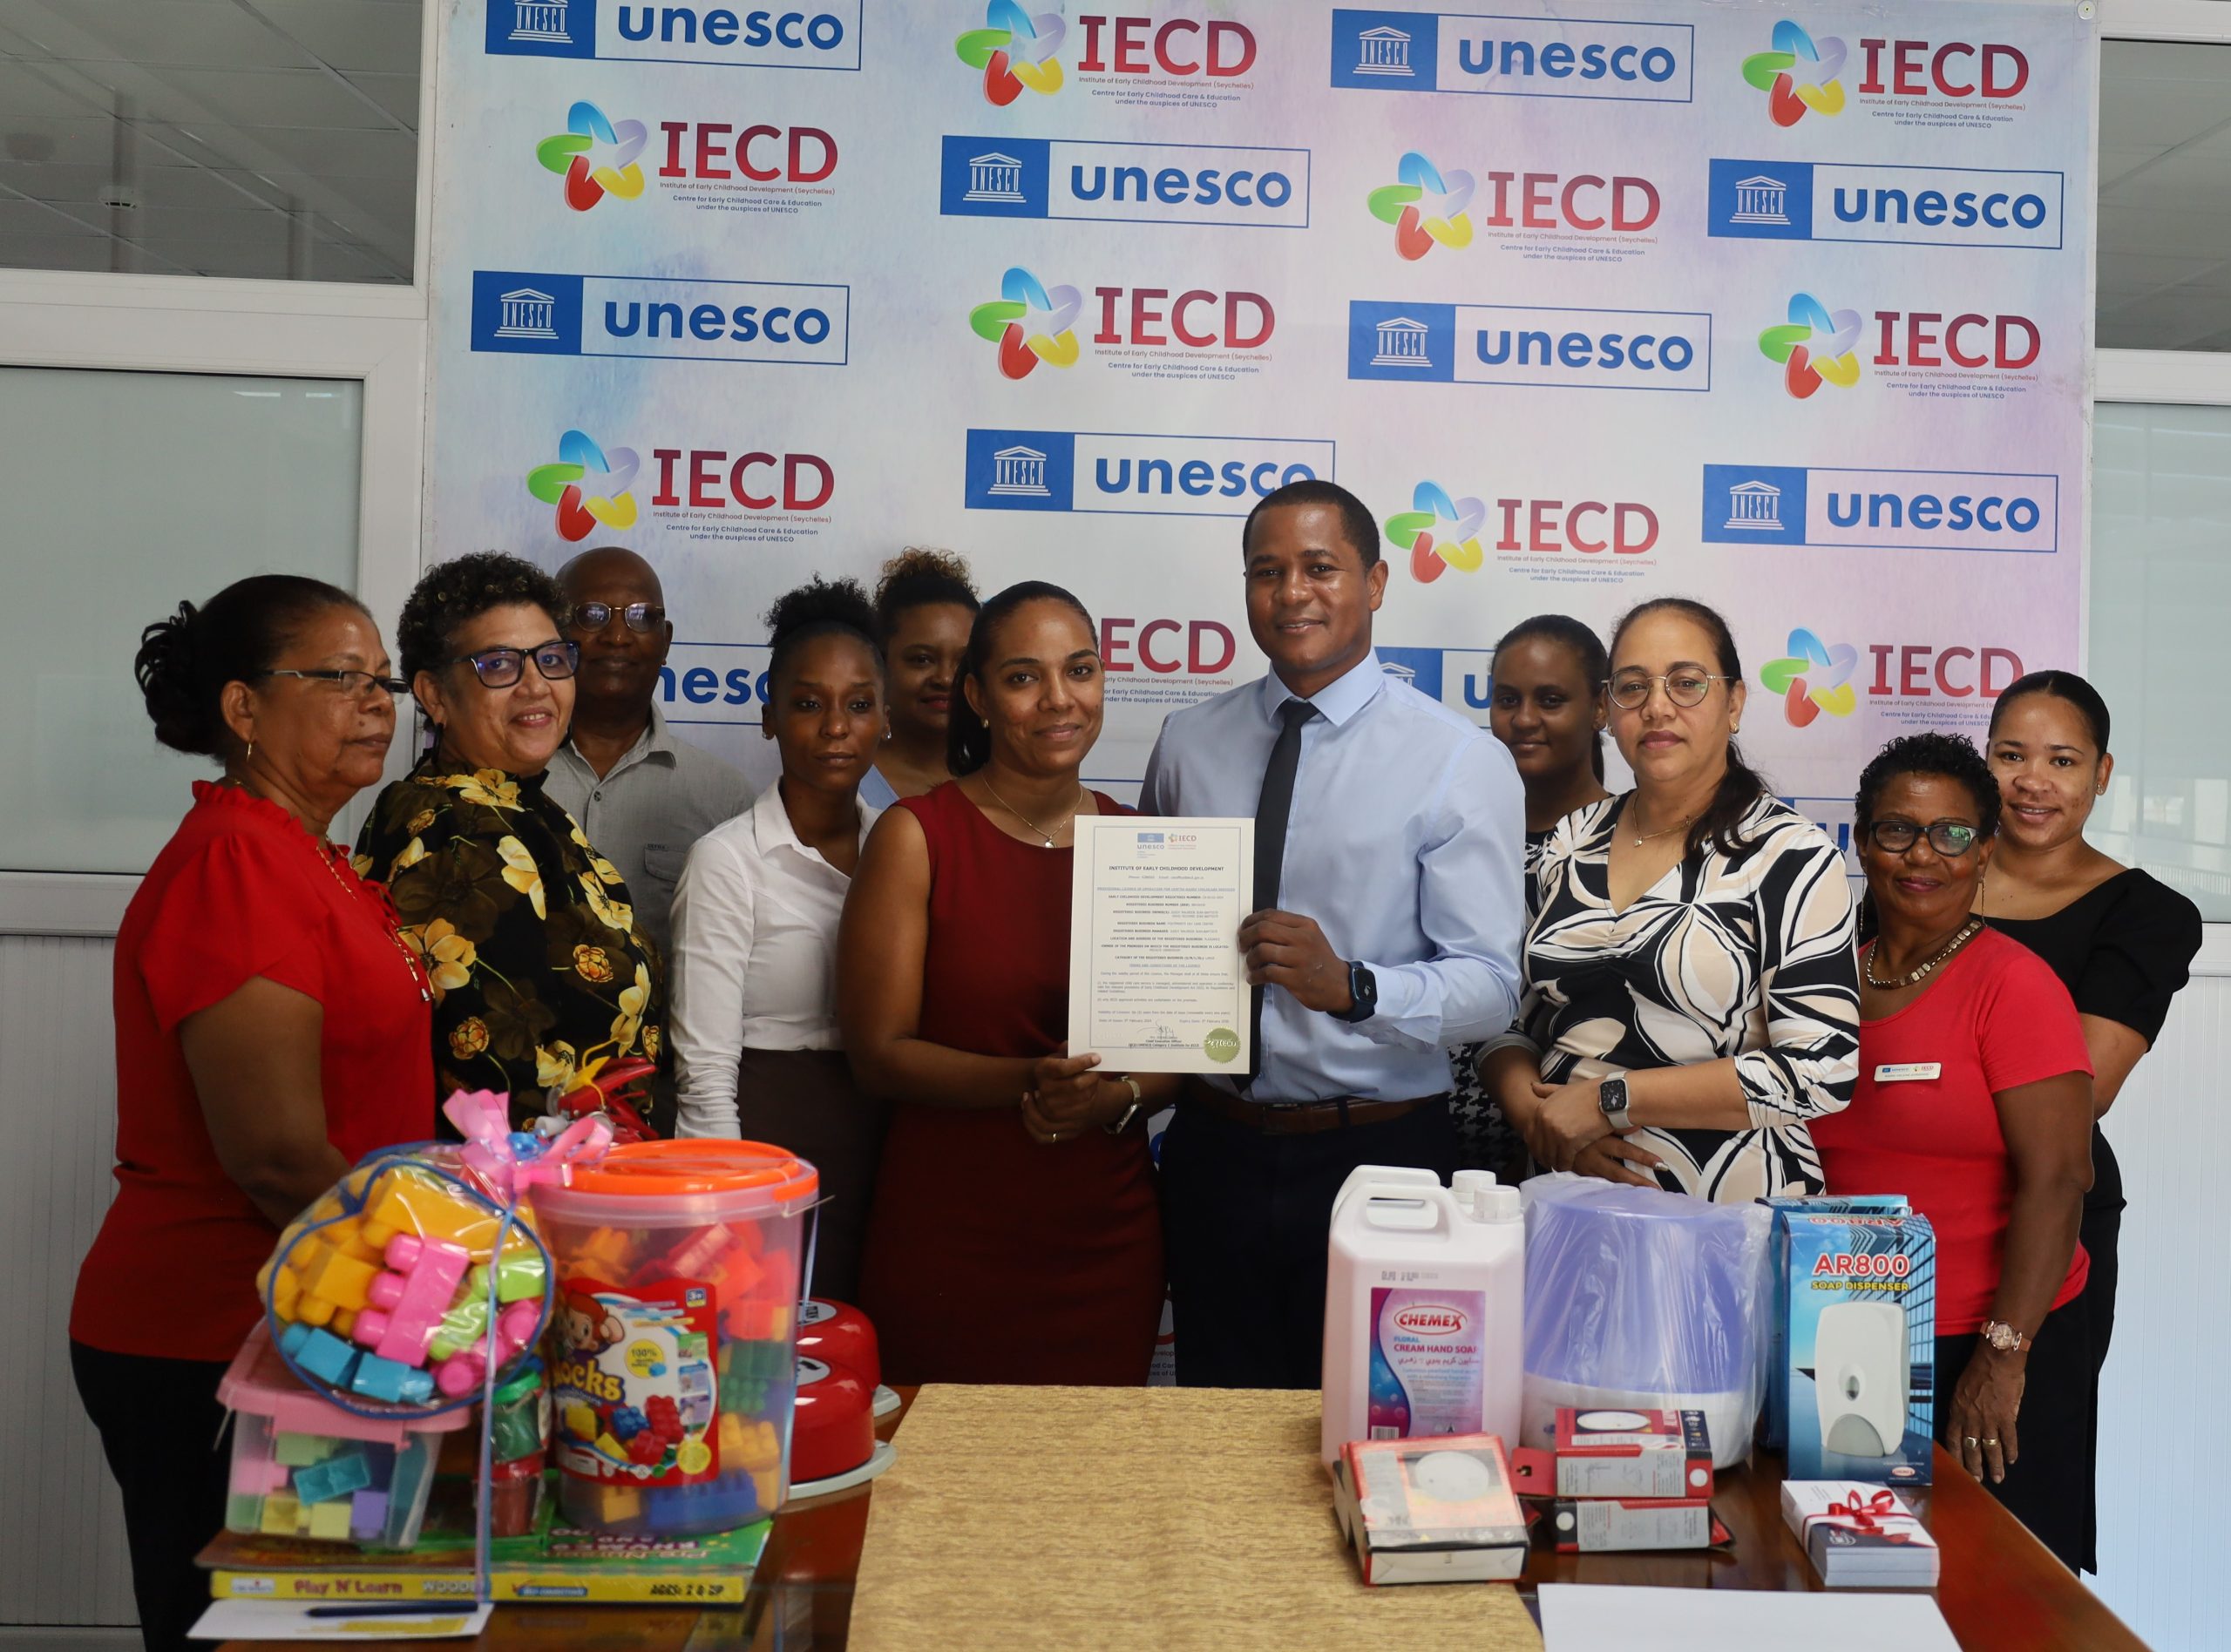 IECD / UNESCO Category 2 Institute Welcomes Footprints Daycare Centre into the Family